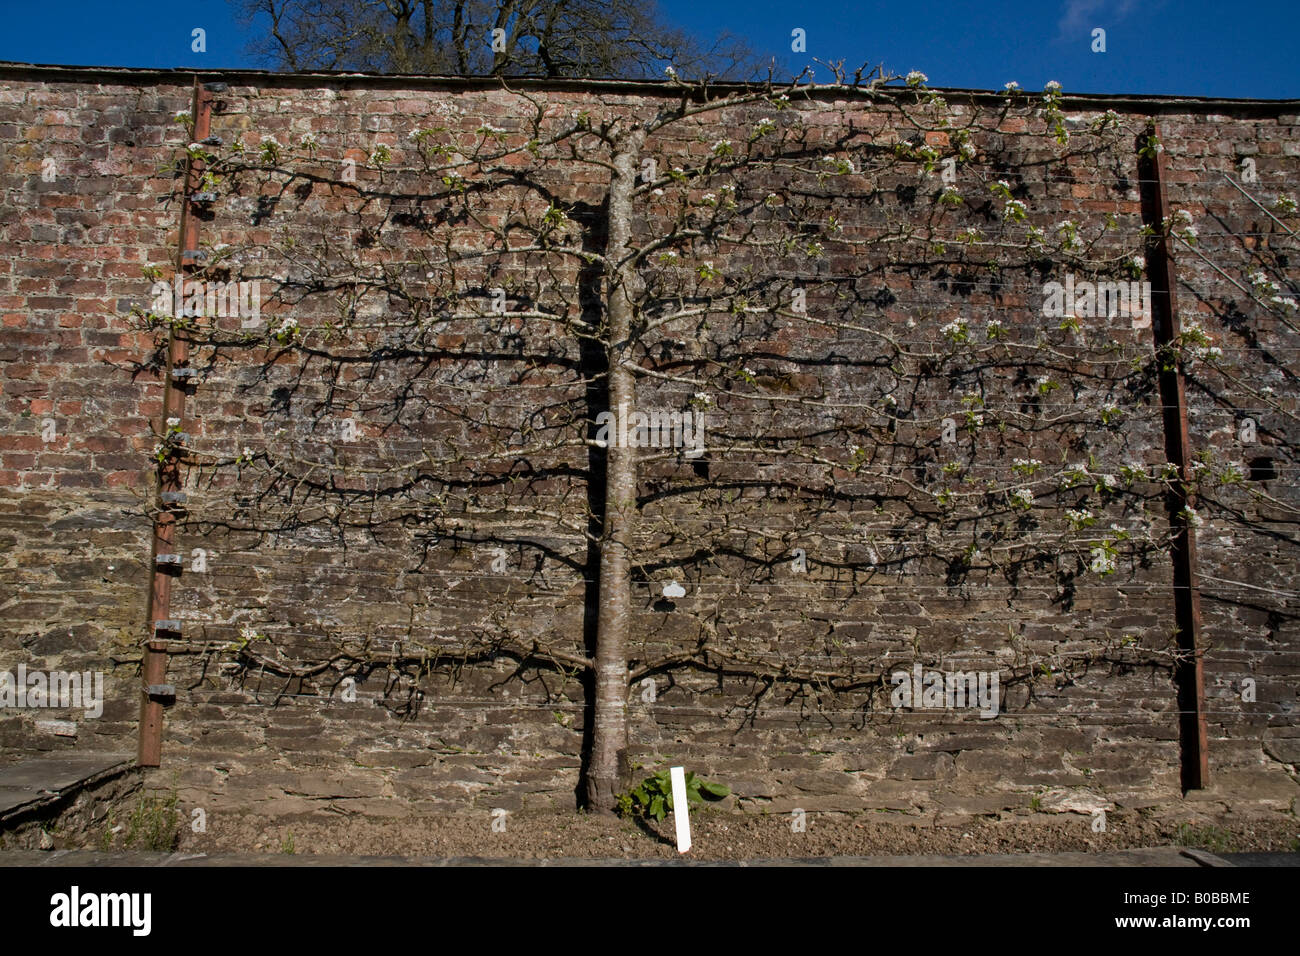 Beurre hardy pear tree trained to grow on brick wall The lost Gardens of Heligan Stock Photo